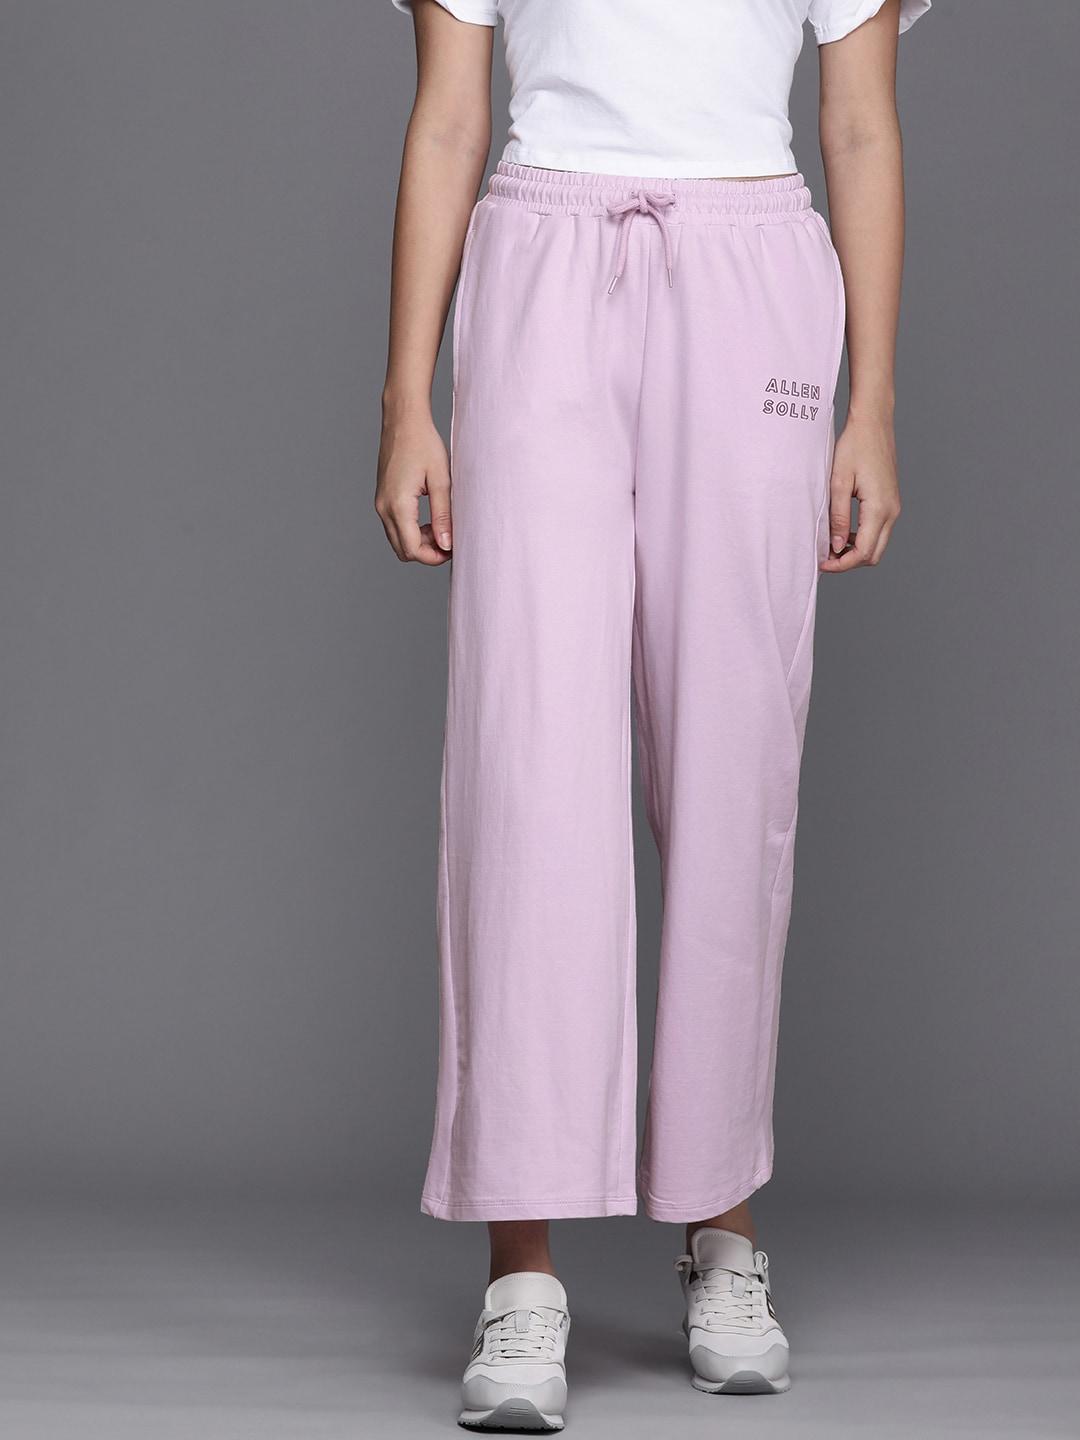 allen-solly-woman-women-lavender-flared-high-rise-culottes-trousers